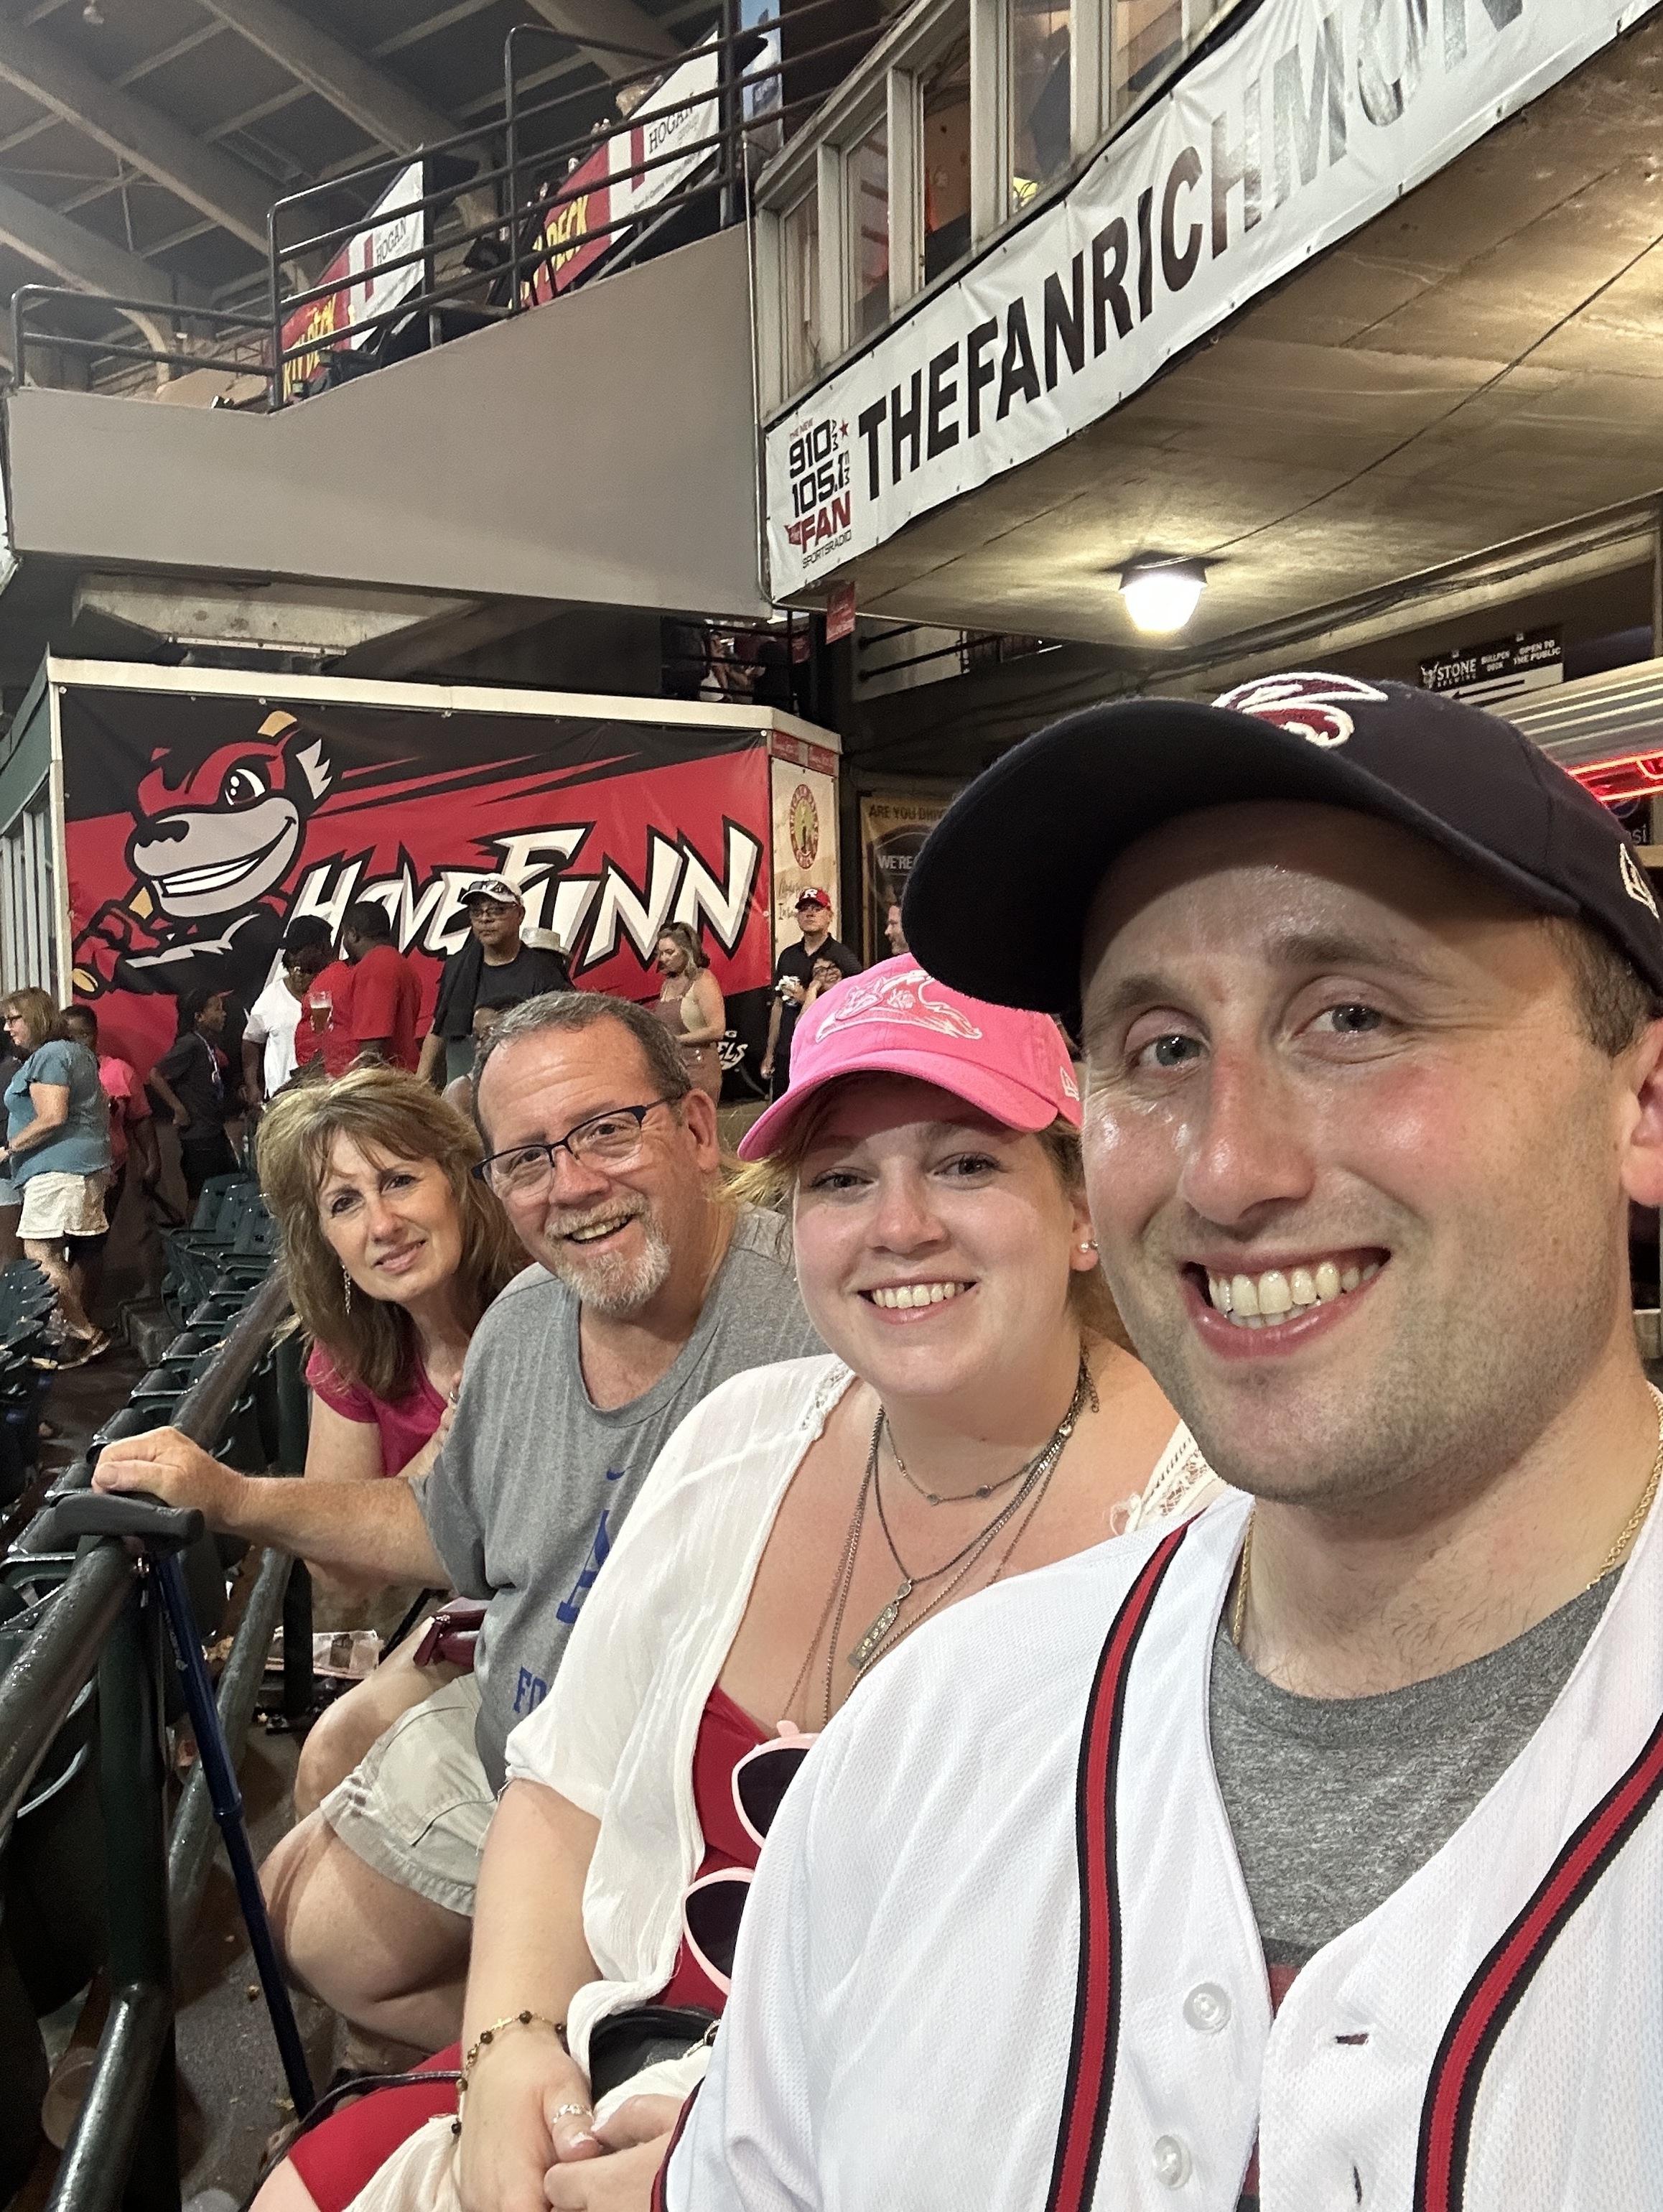 New bag rule for Richmond Flying Squirrels games